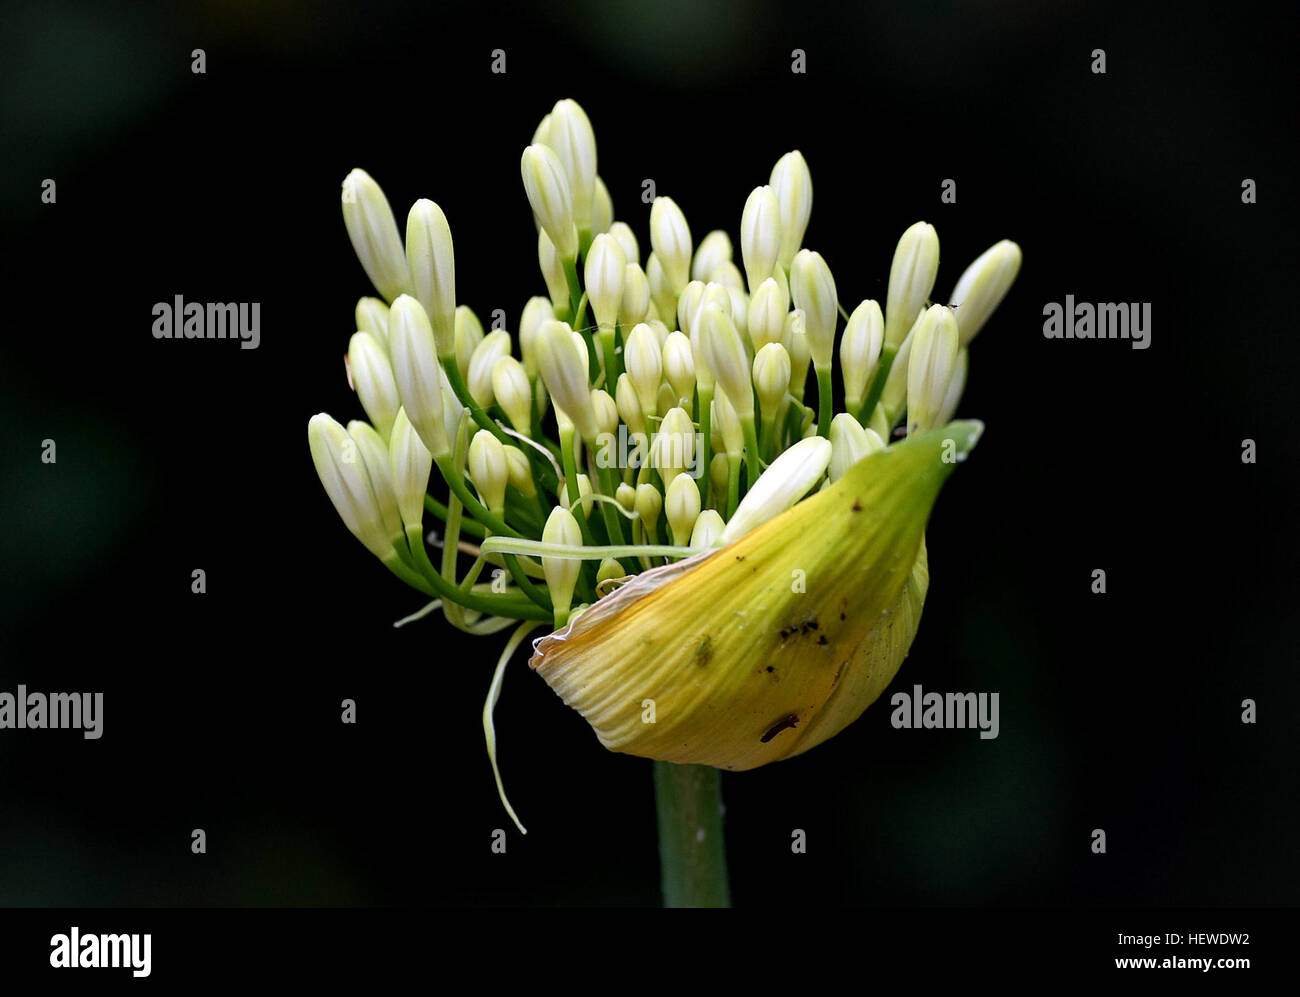 Agapanthus (African lily) are summer-flowering perennial plants, grown for their showy flowers, commonly in shades of blue and purple, but also white and pink. They thrive in any well-drained, sunny position in the garden, or grow these beauties in containers. Stock Photo